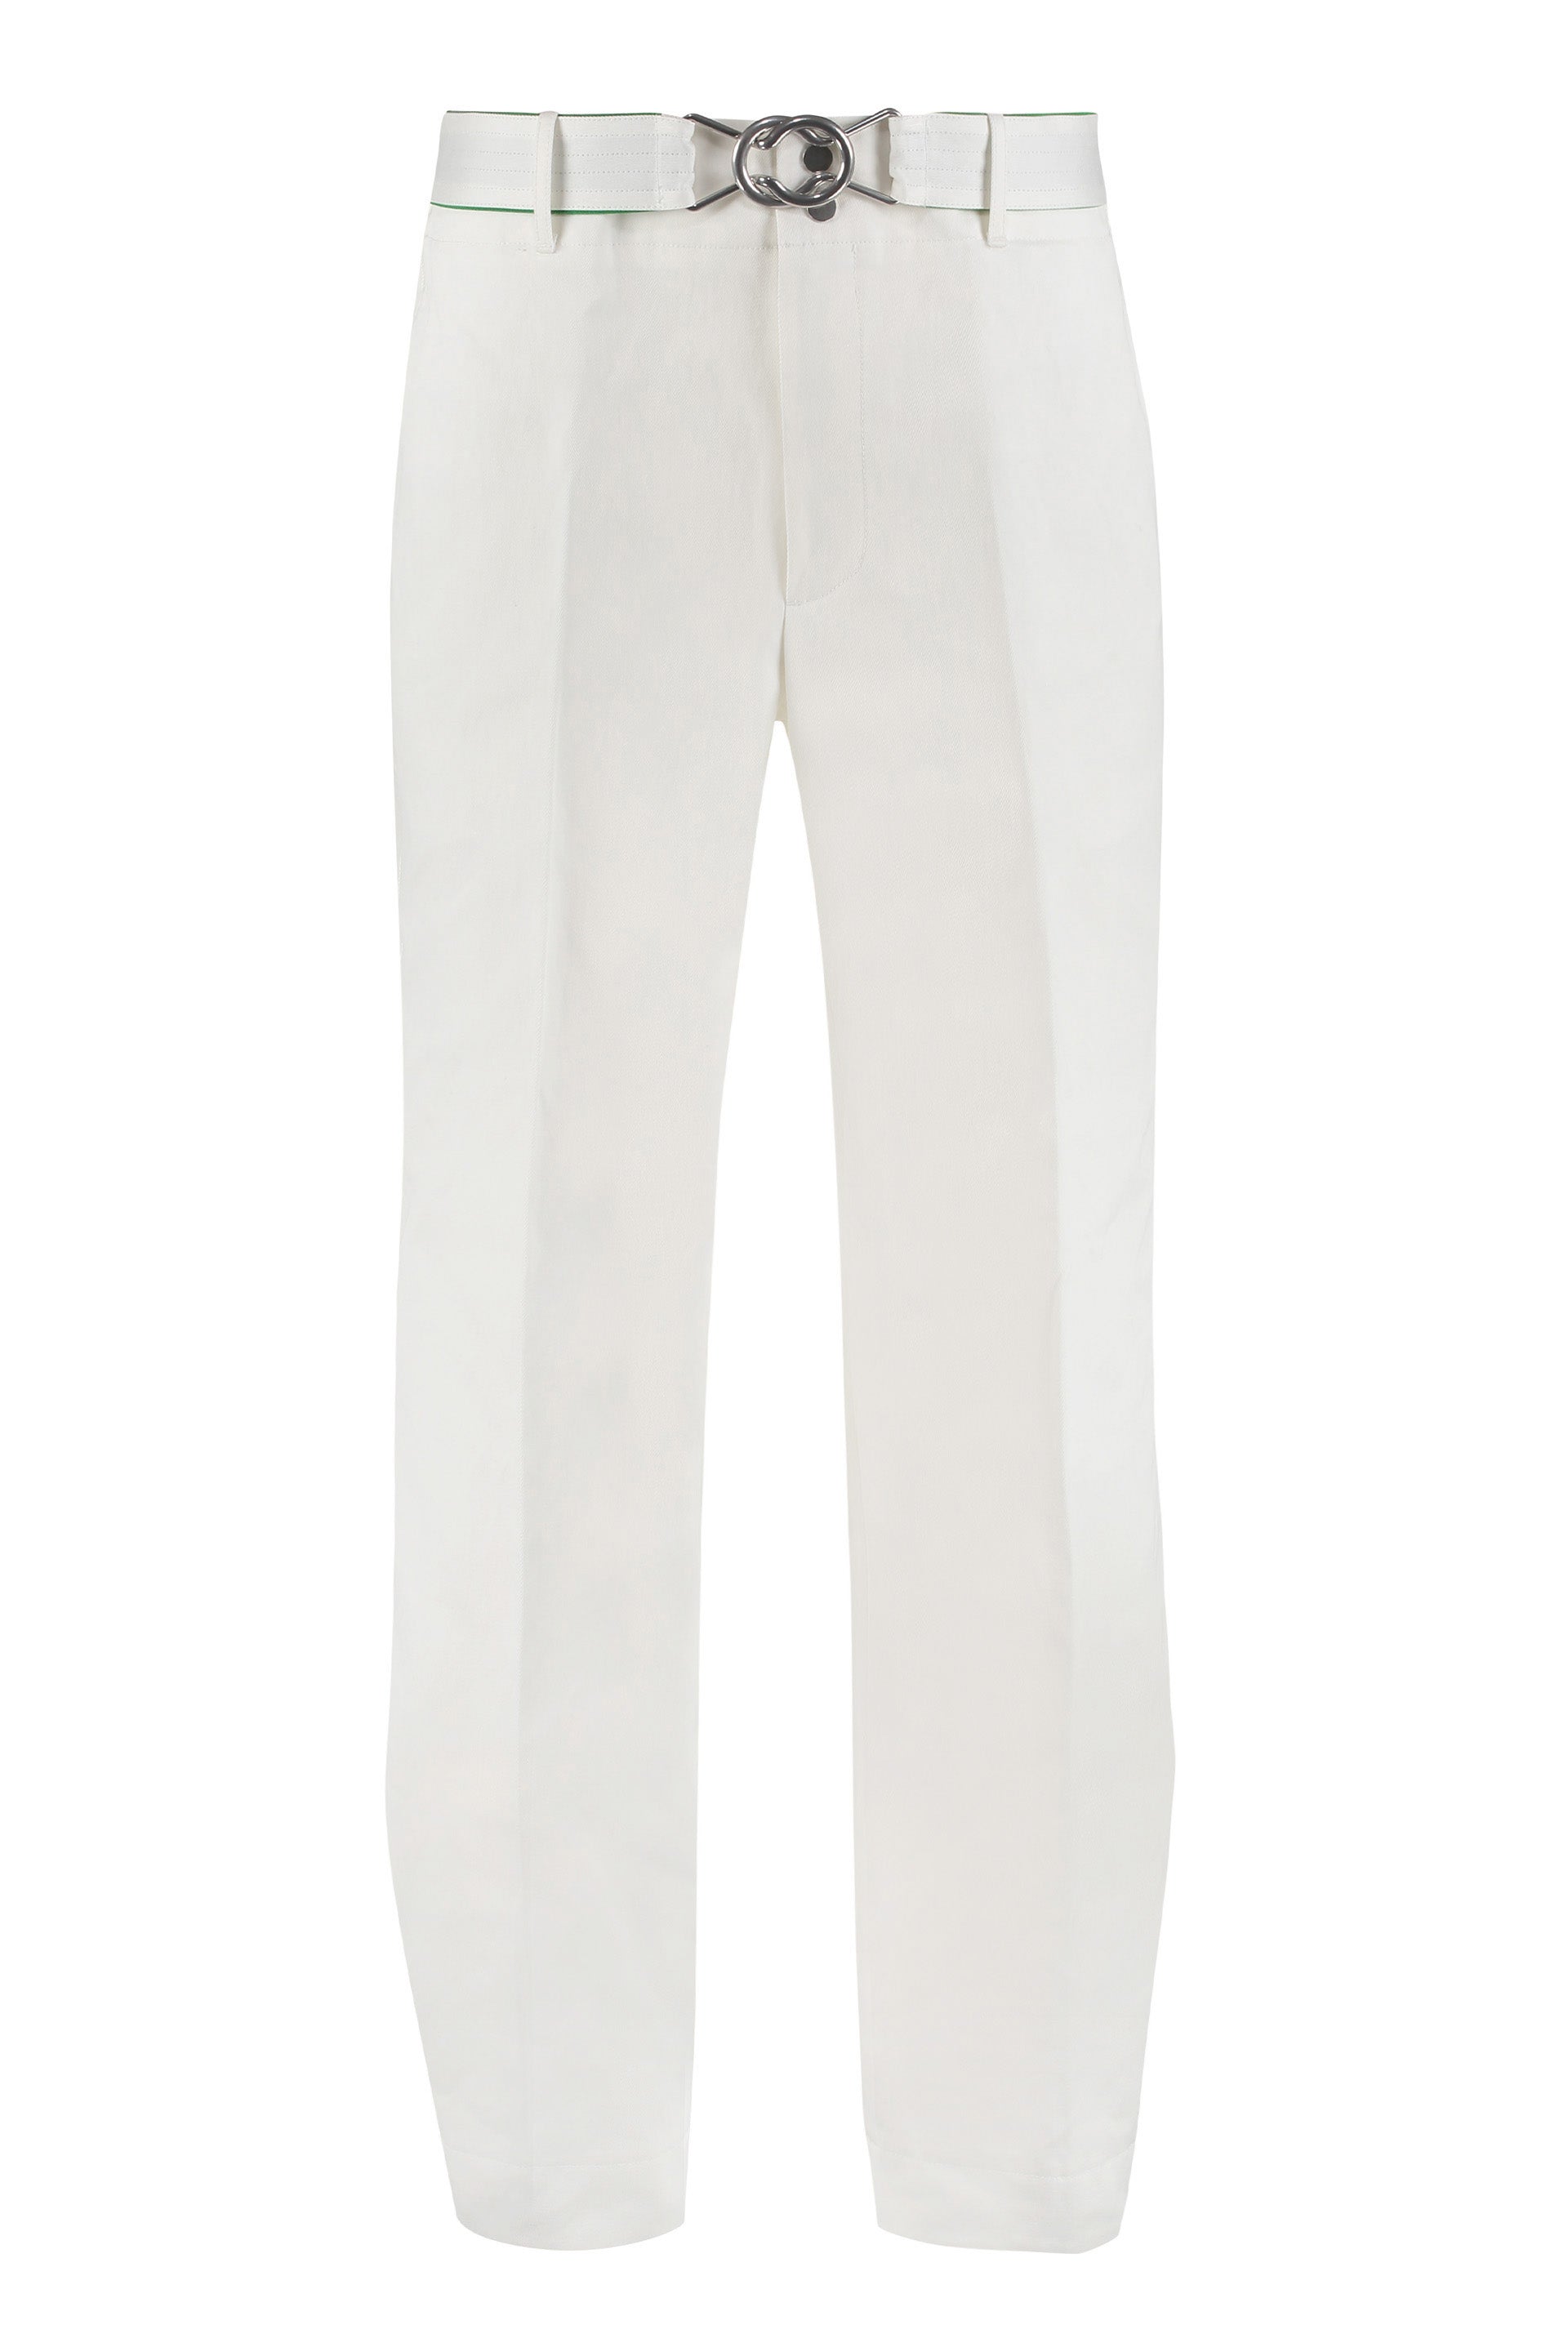 Bottega Veneta Men's White Cotton Trousers With Removable Belt And Horn Buttons